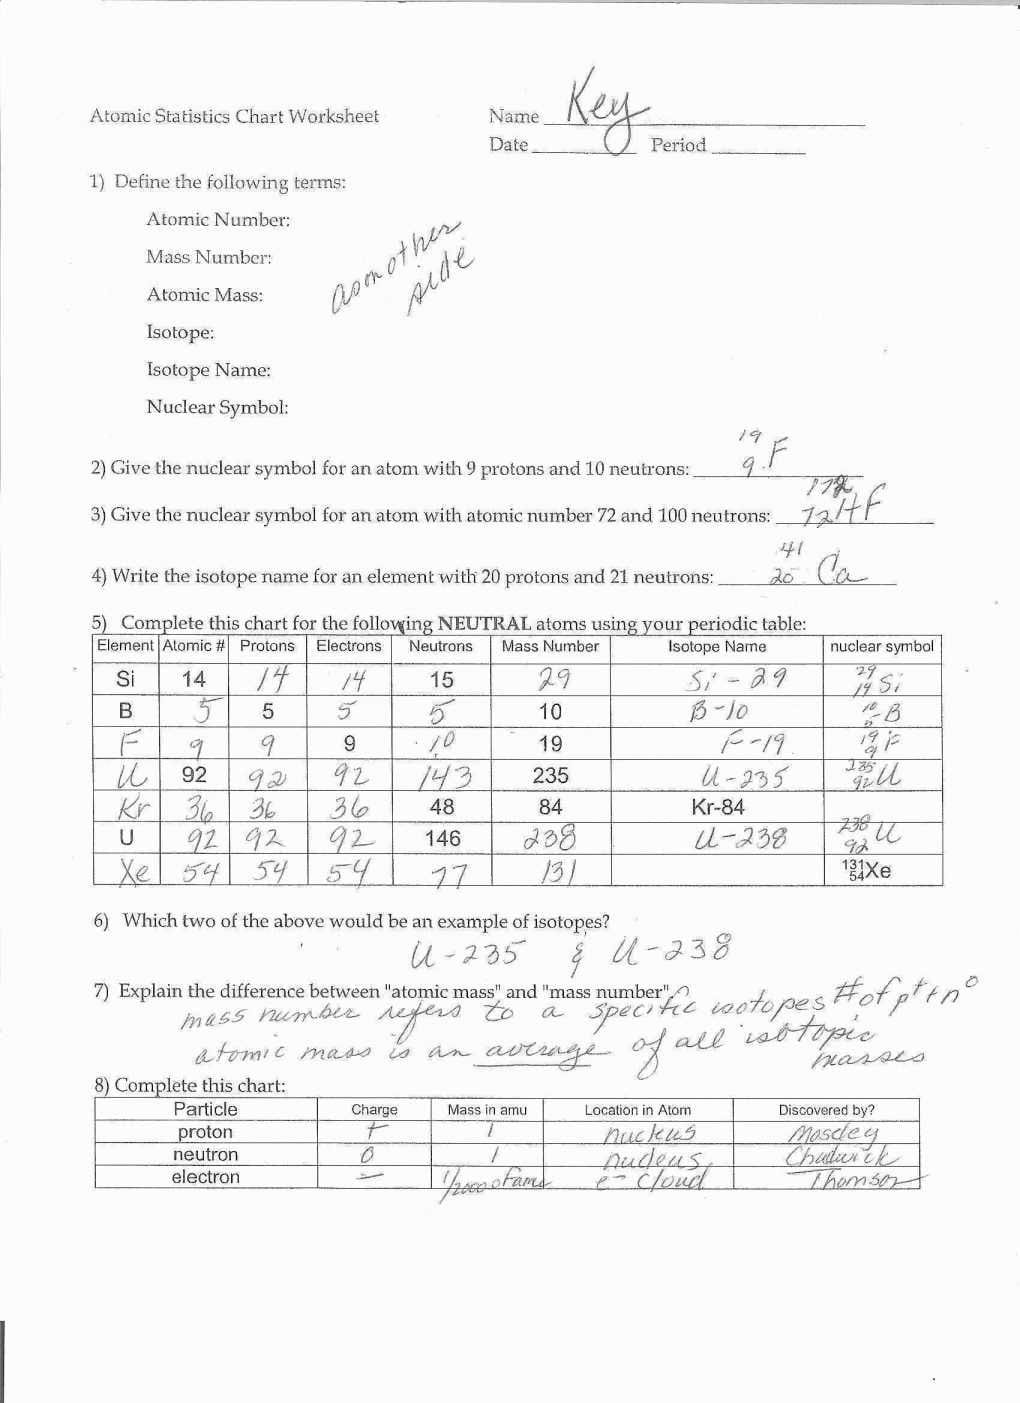 calculating-protons-and-neutrons-worksheet